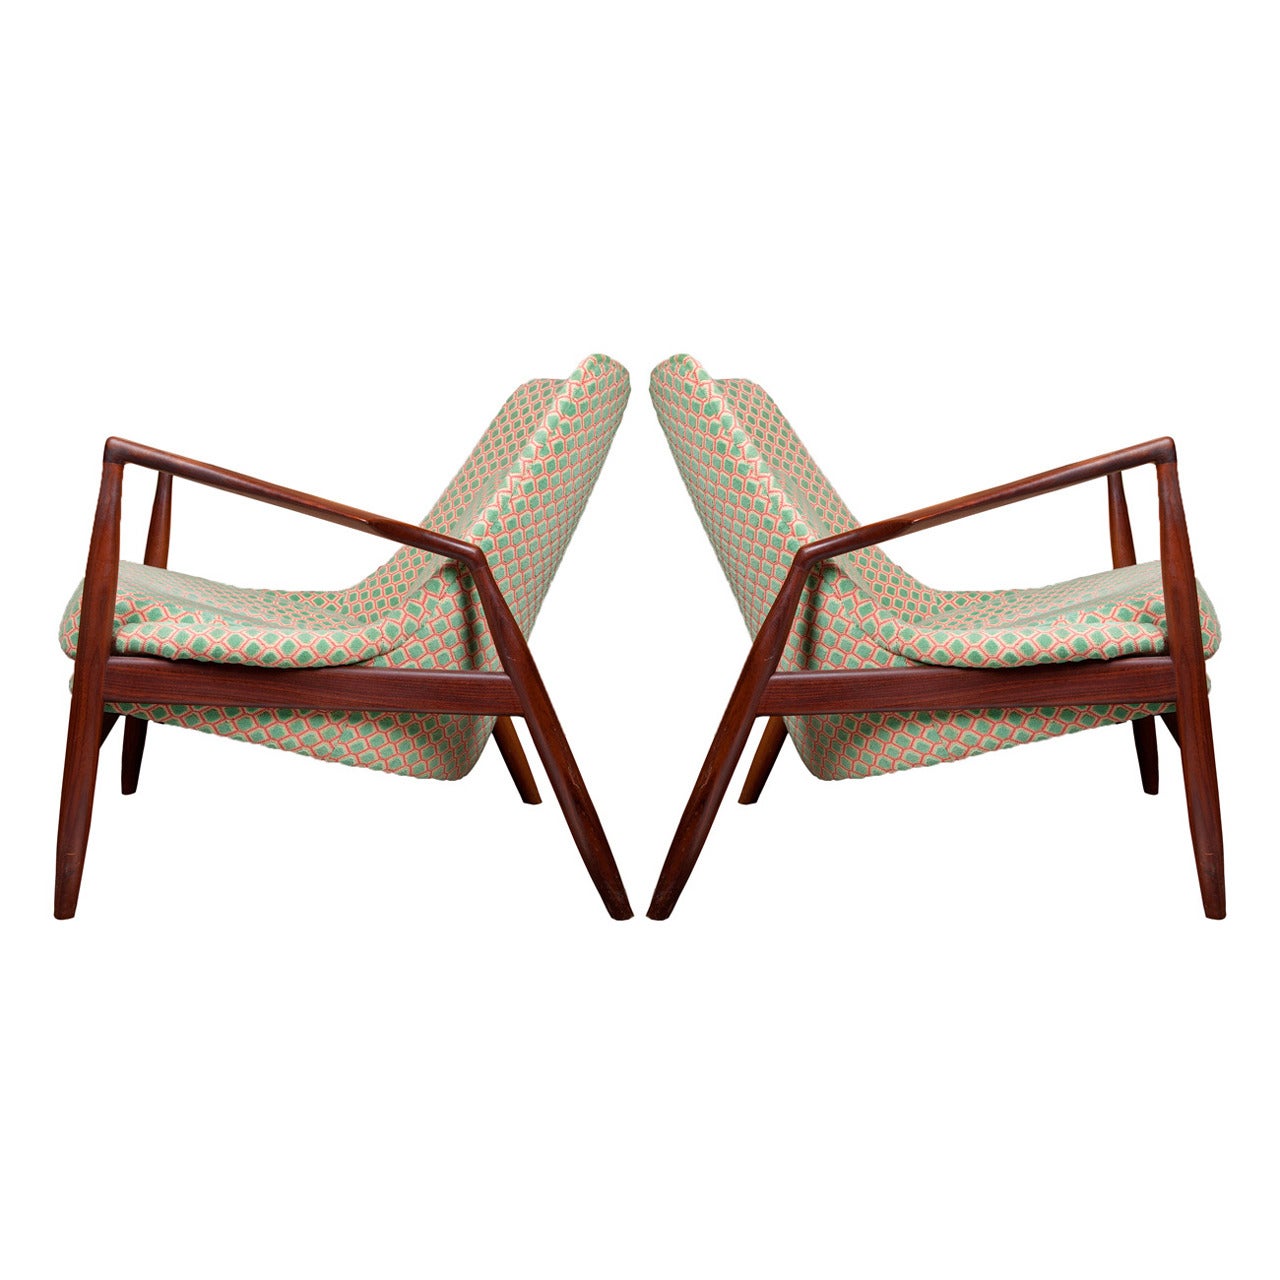 Pair of Sculptural Danish Seal Chairs by Ib Kofod Larsen For Sale